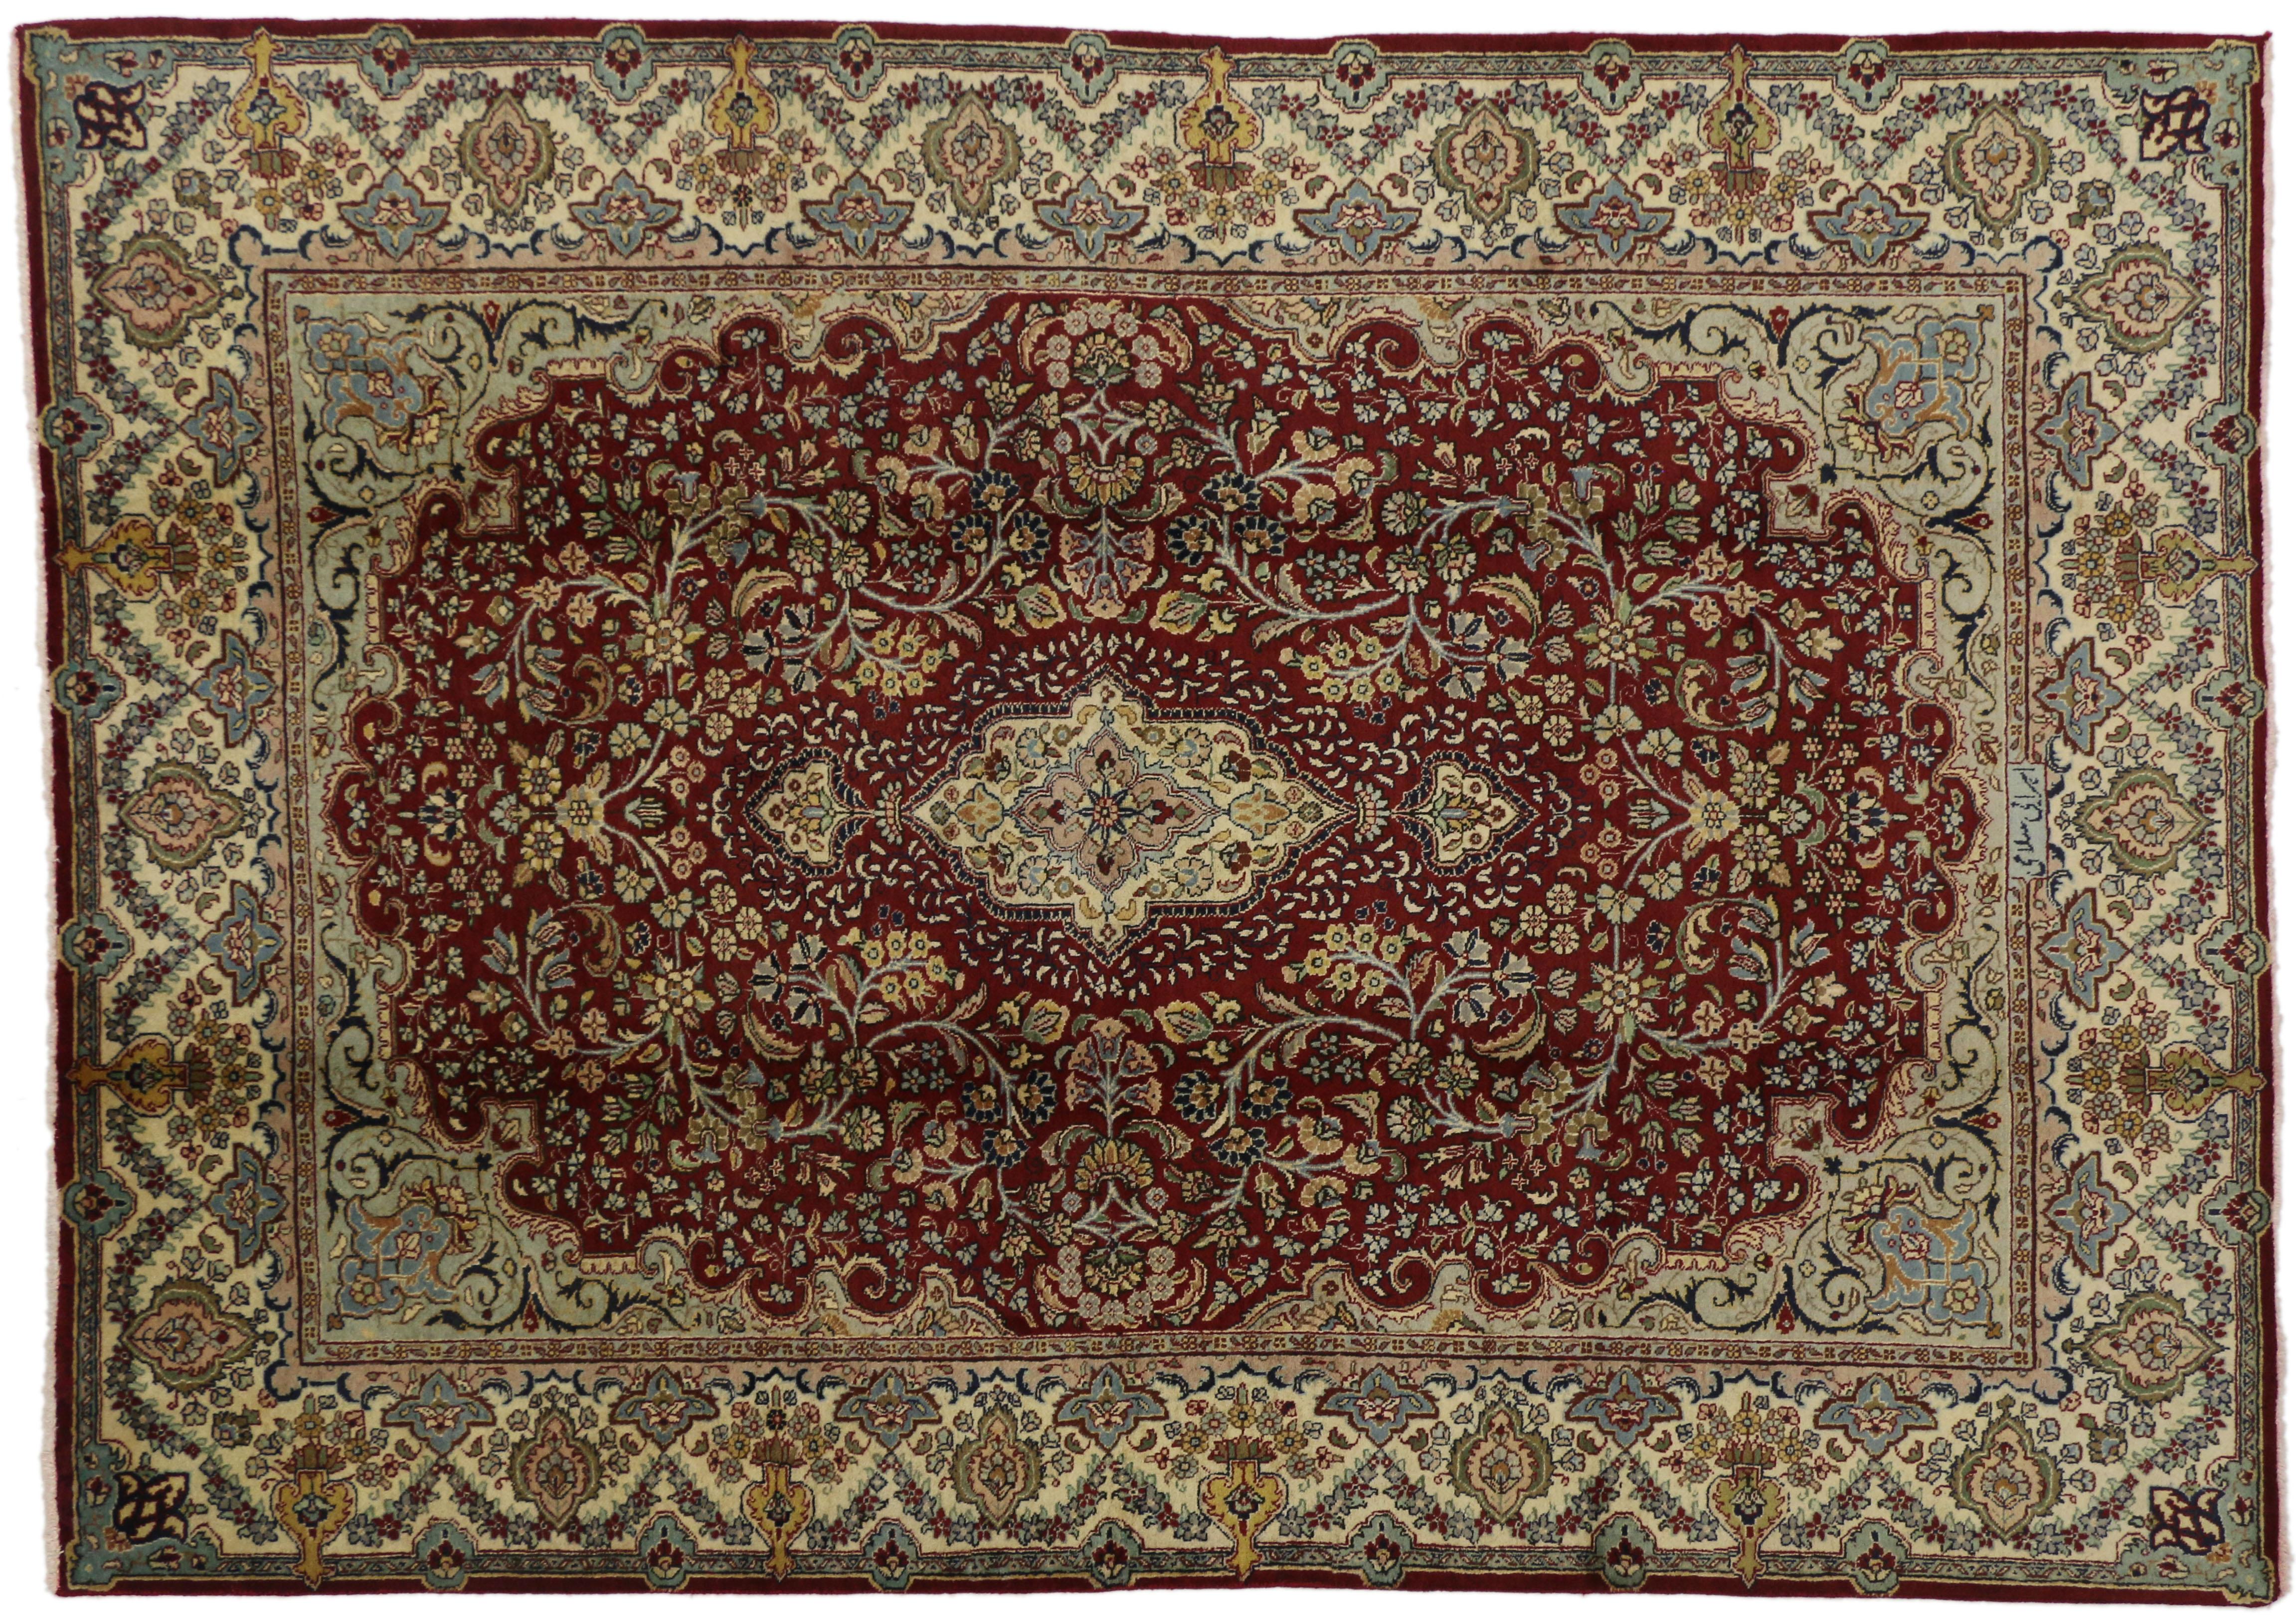 76583, vintage Persian Tabriz rug with traditional style. This hand-knotted wool vintage Persian Tabriz rug features center medallion with an allover pattern surrounded by arabesque spandrels and a classic border creating a well-balanced and